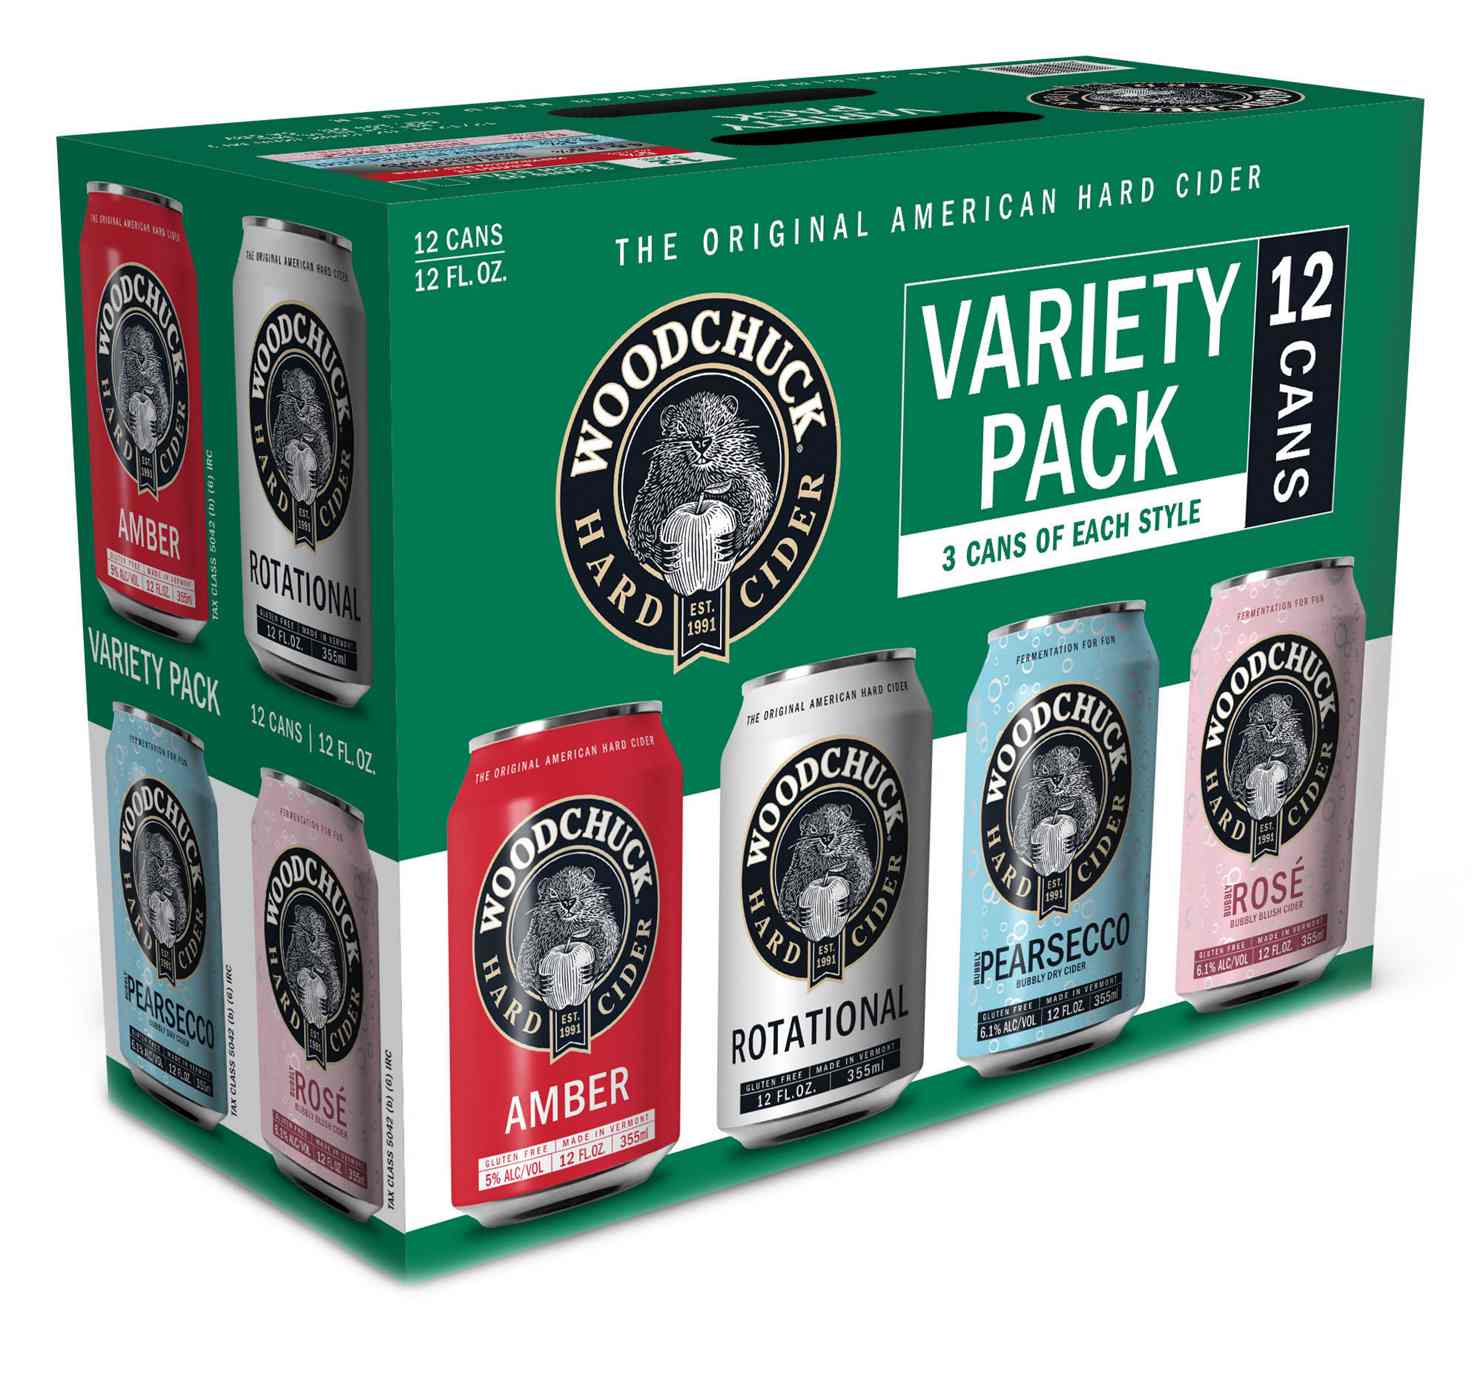 Woodchuck Hard Cider 12 oz Cans Variety Pack; image 1 of 2